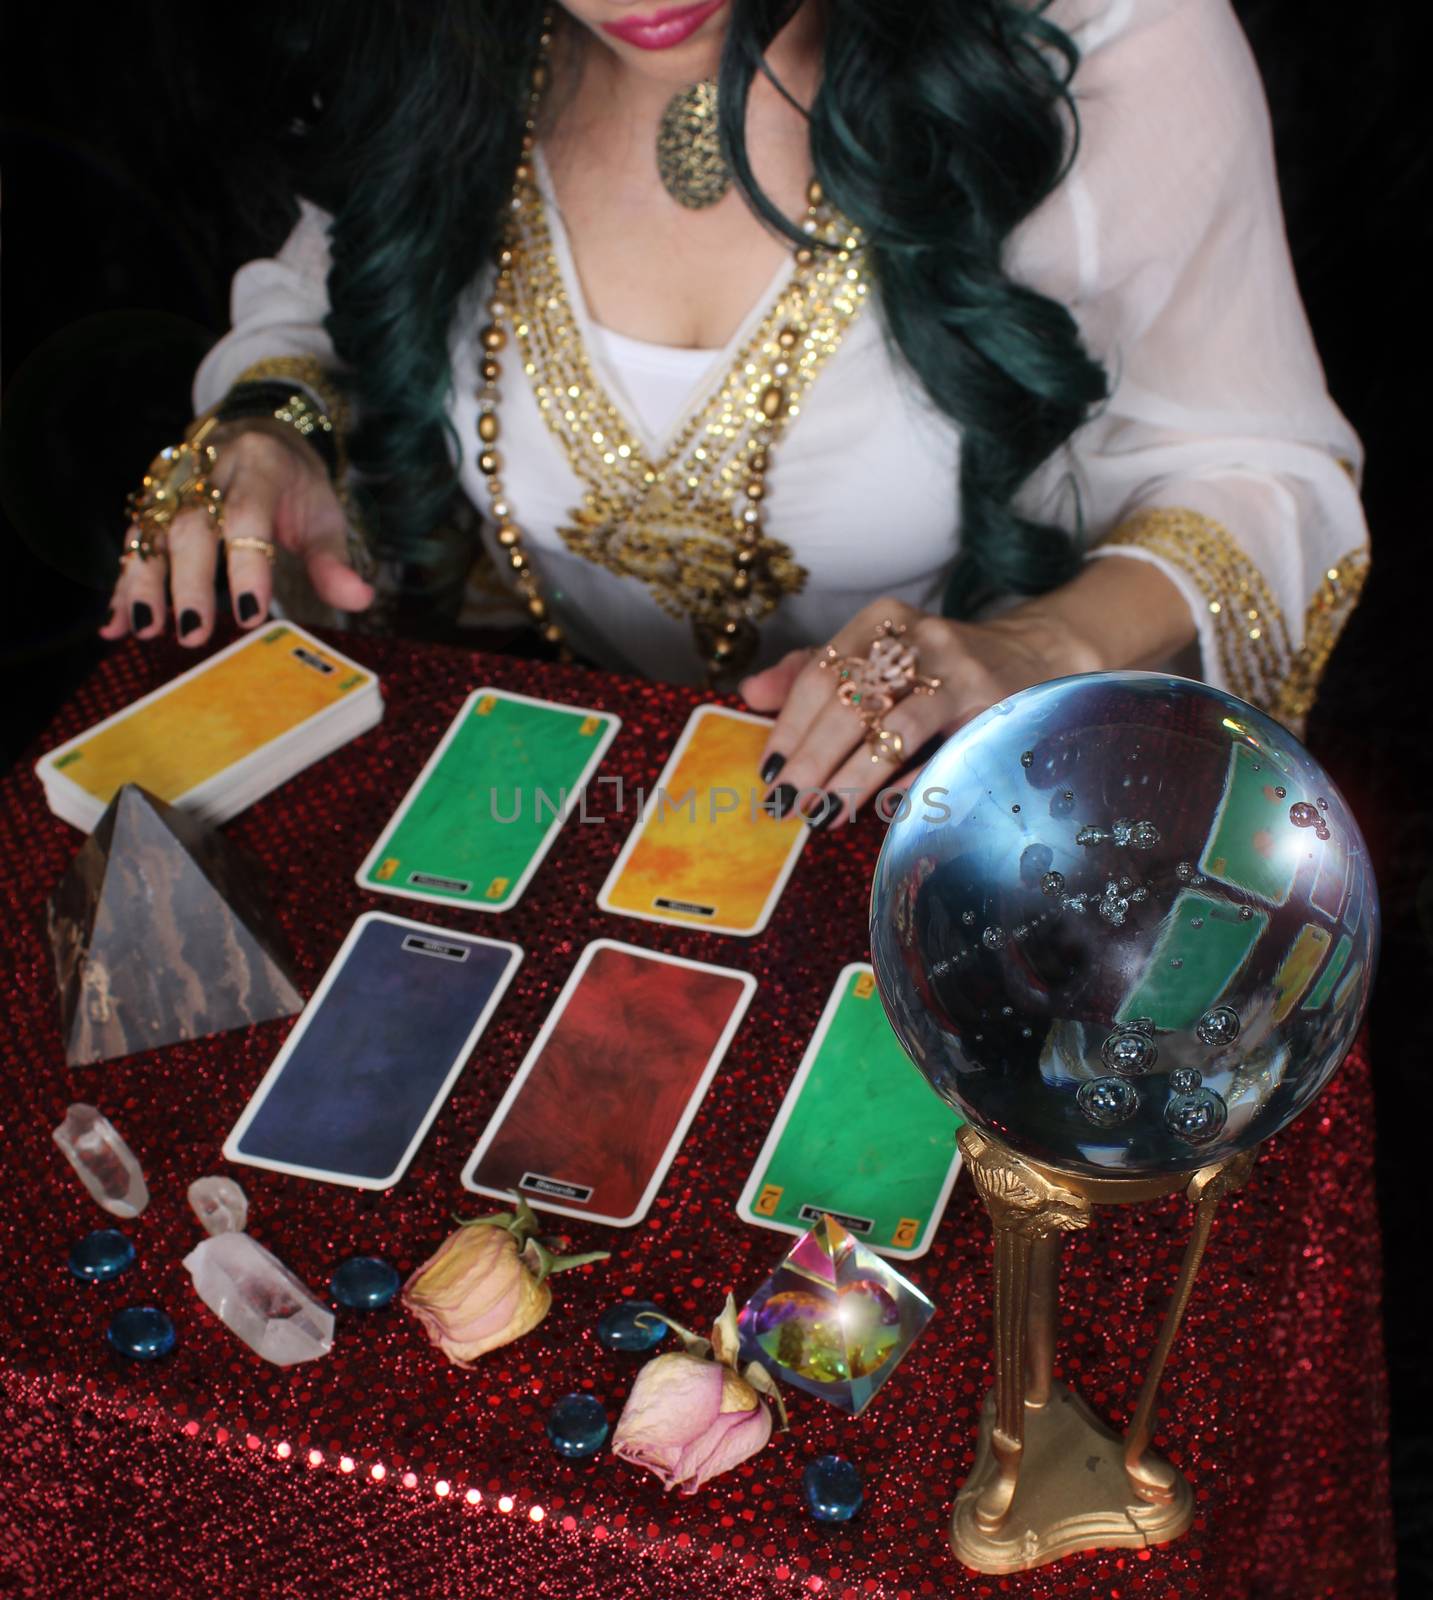 Psychic with crystal ball and tarot cards by Marti157900